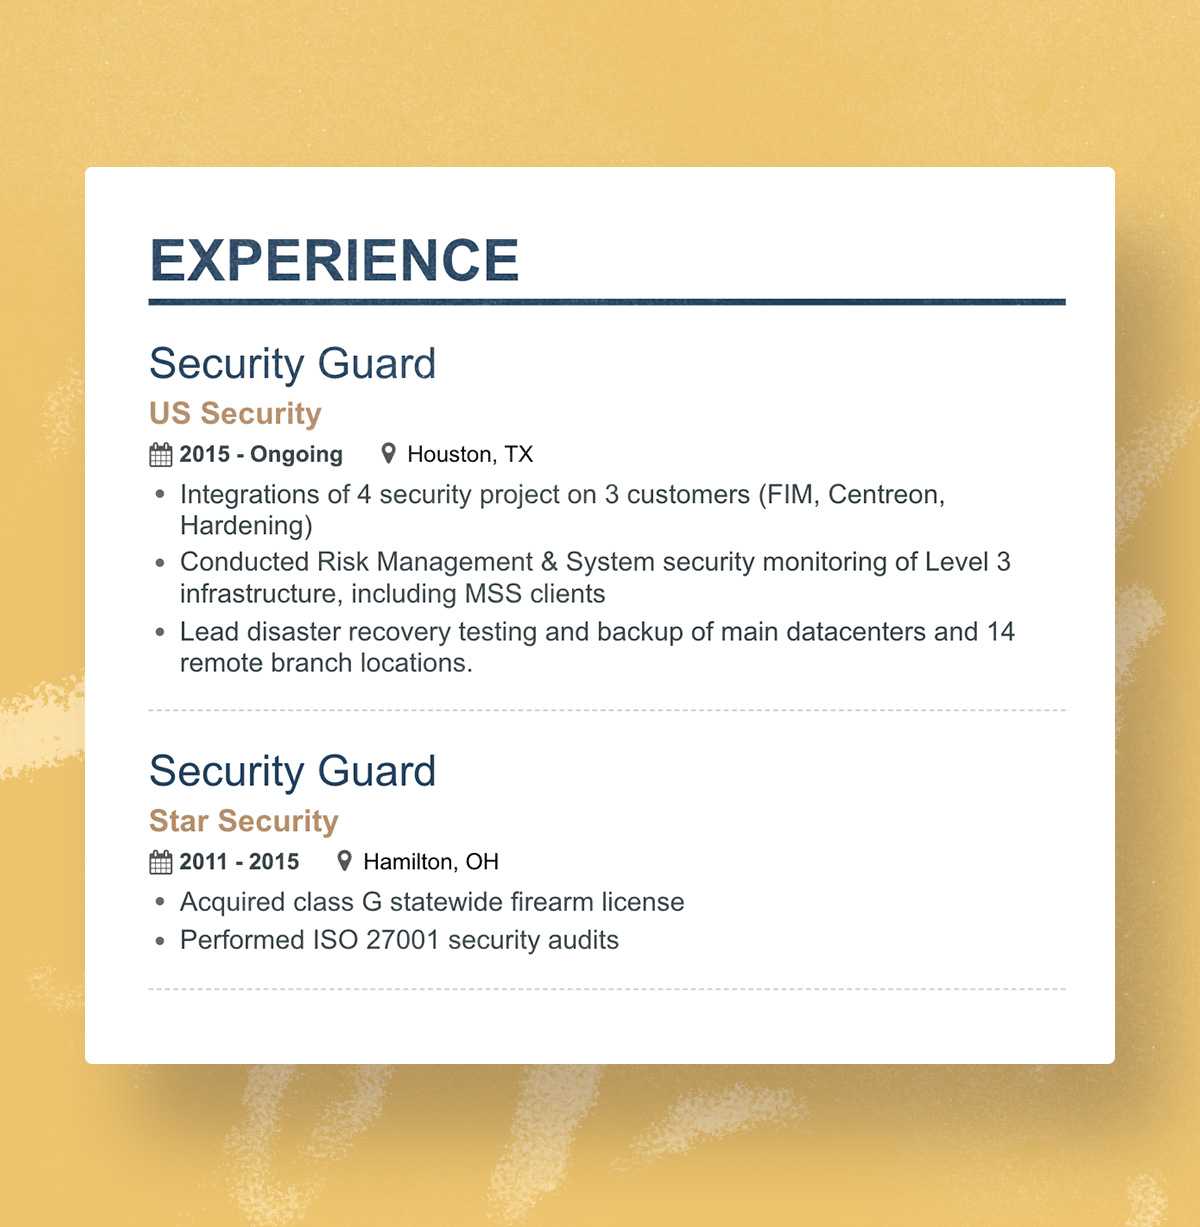 Security Guard Resume Experience